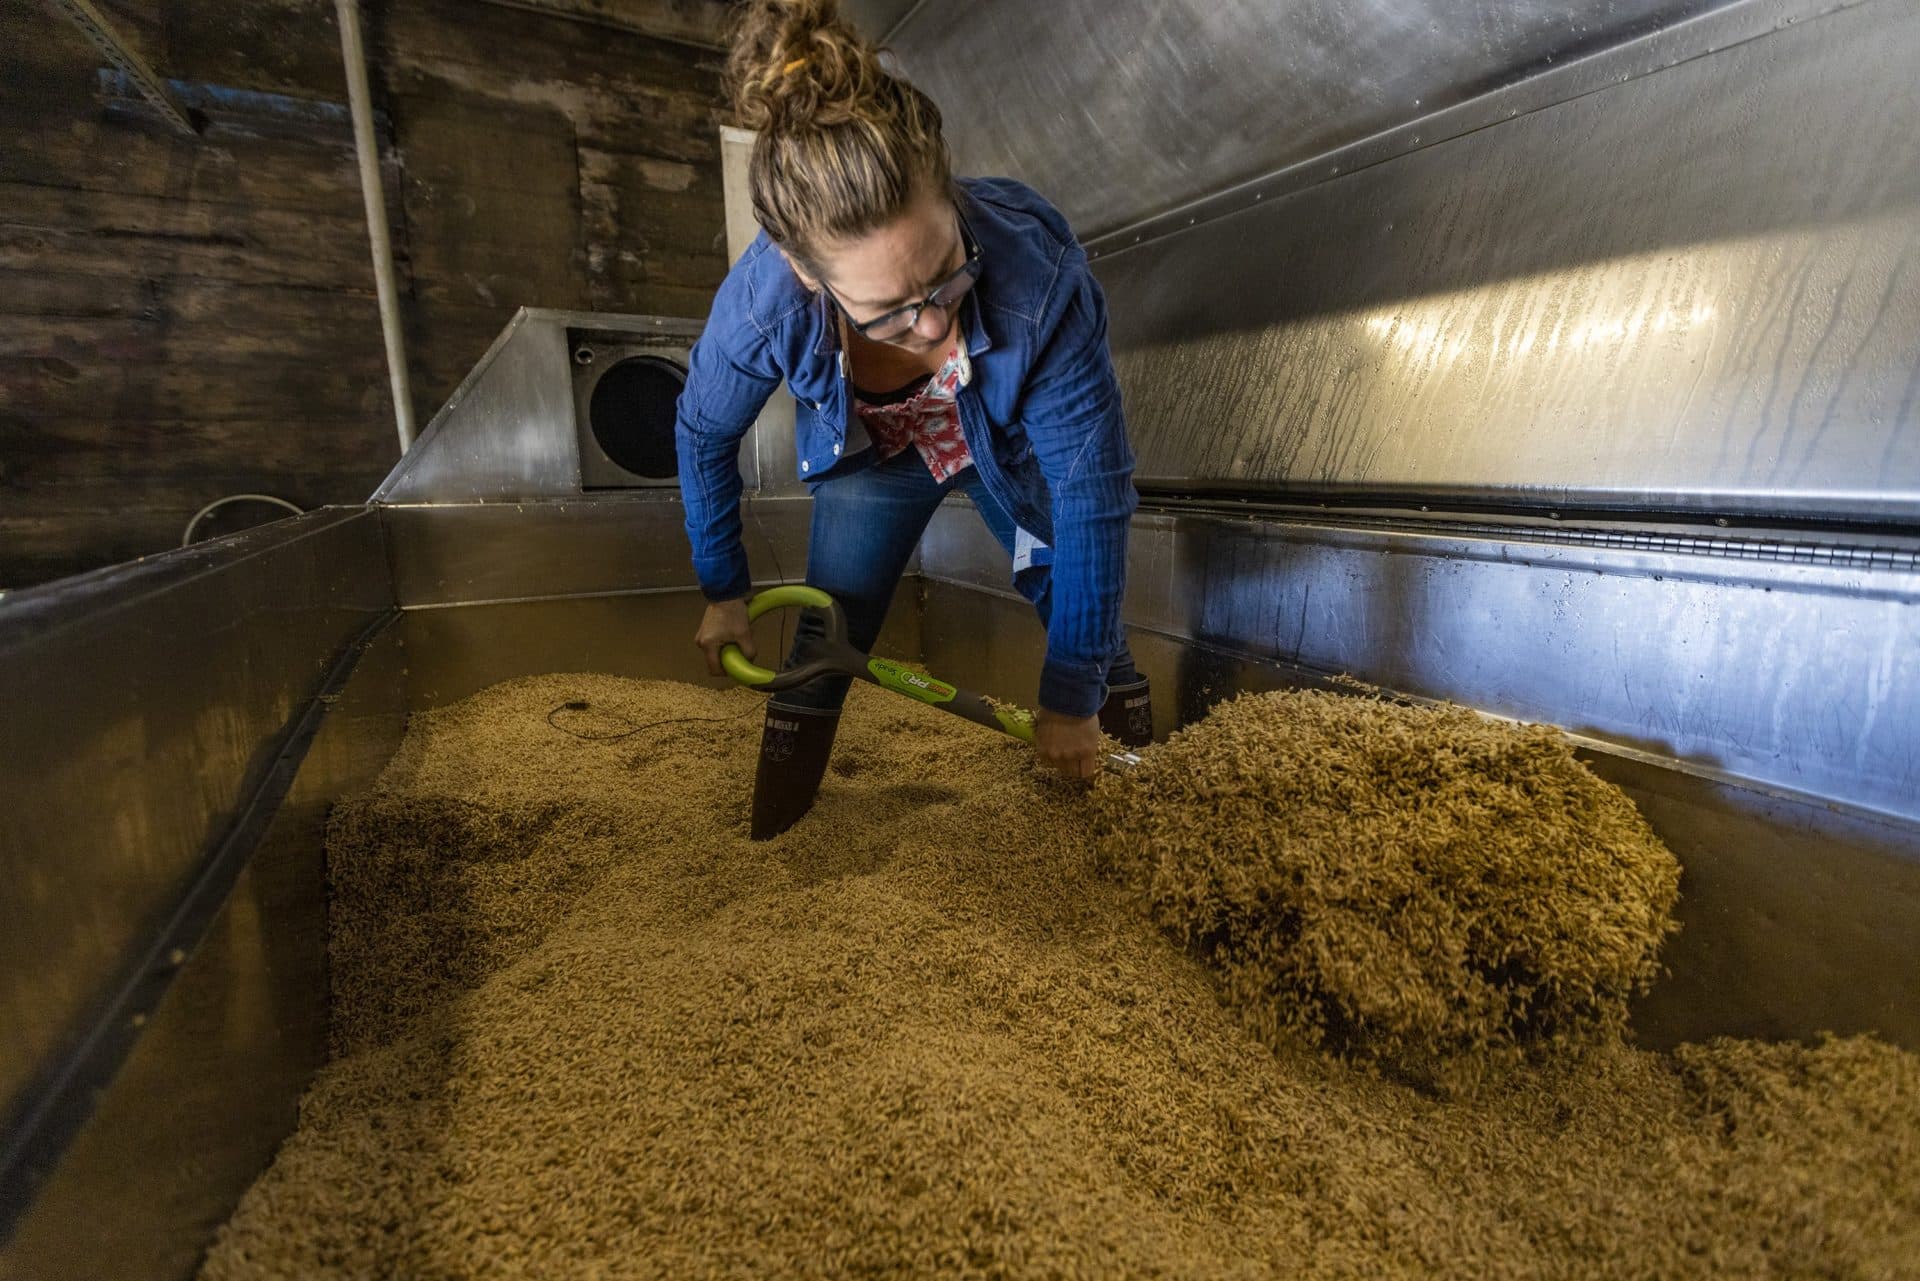 Andrea Stanley, co-owner of Valley Grain Milling in Hadley, uses a shovel to turn grain in the germination tank. (Jesse Costa/WBUR)